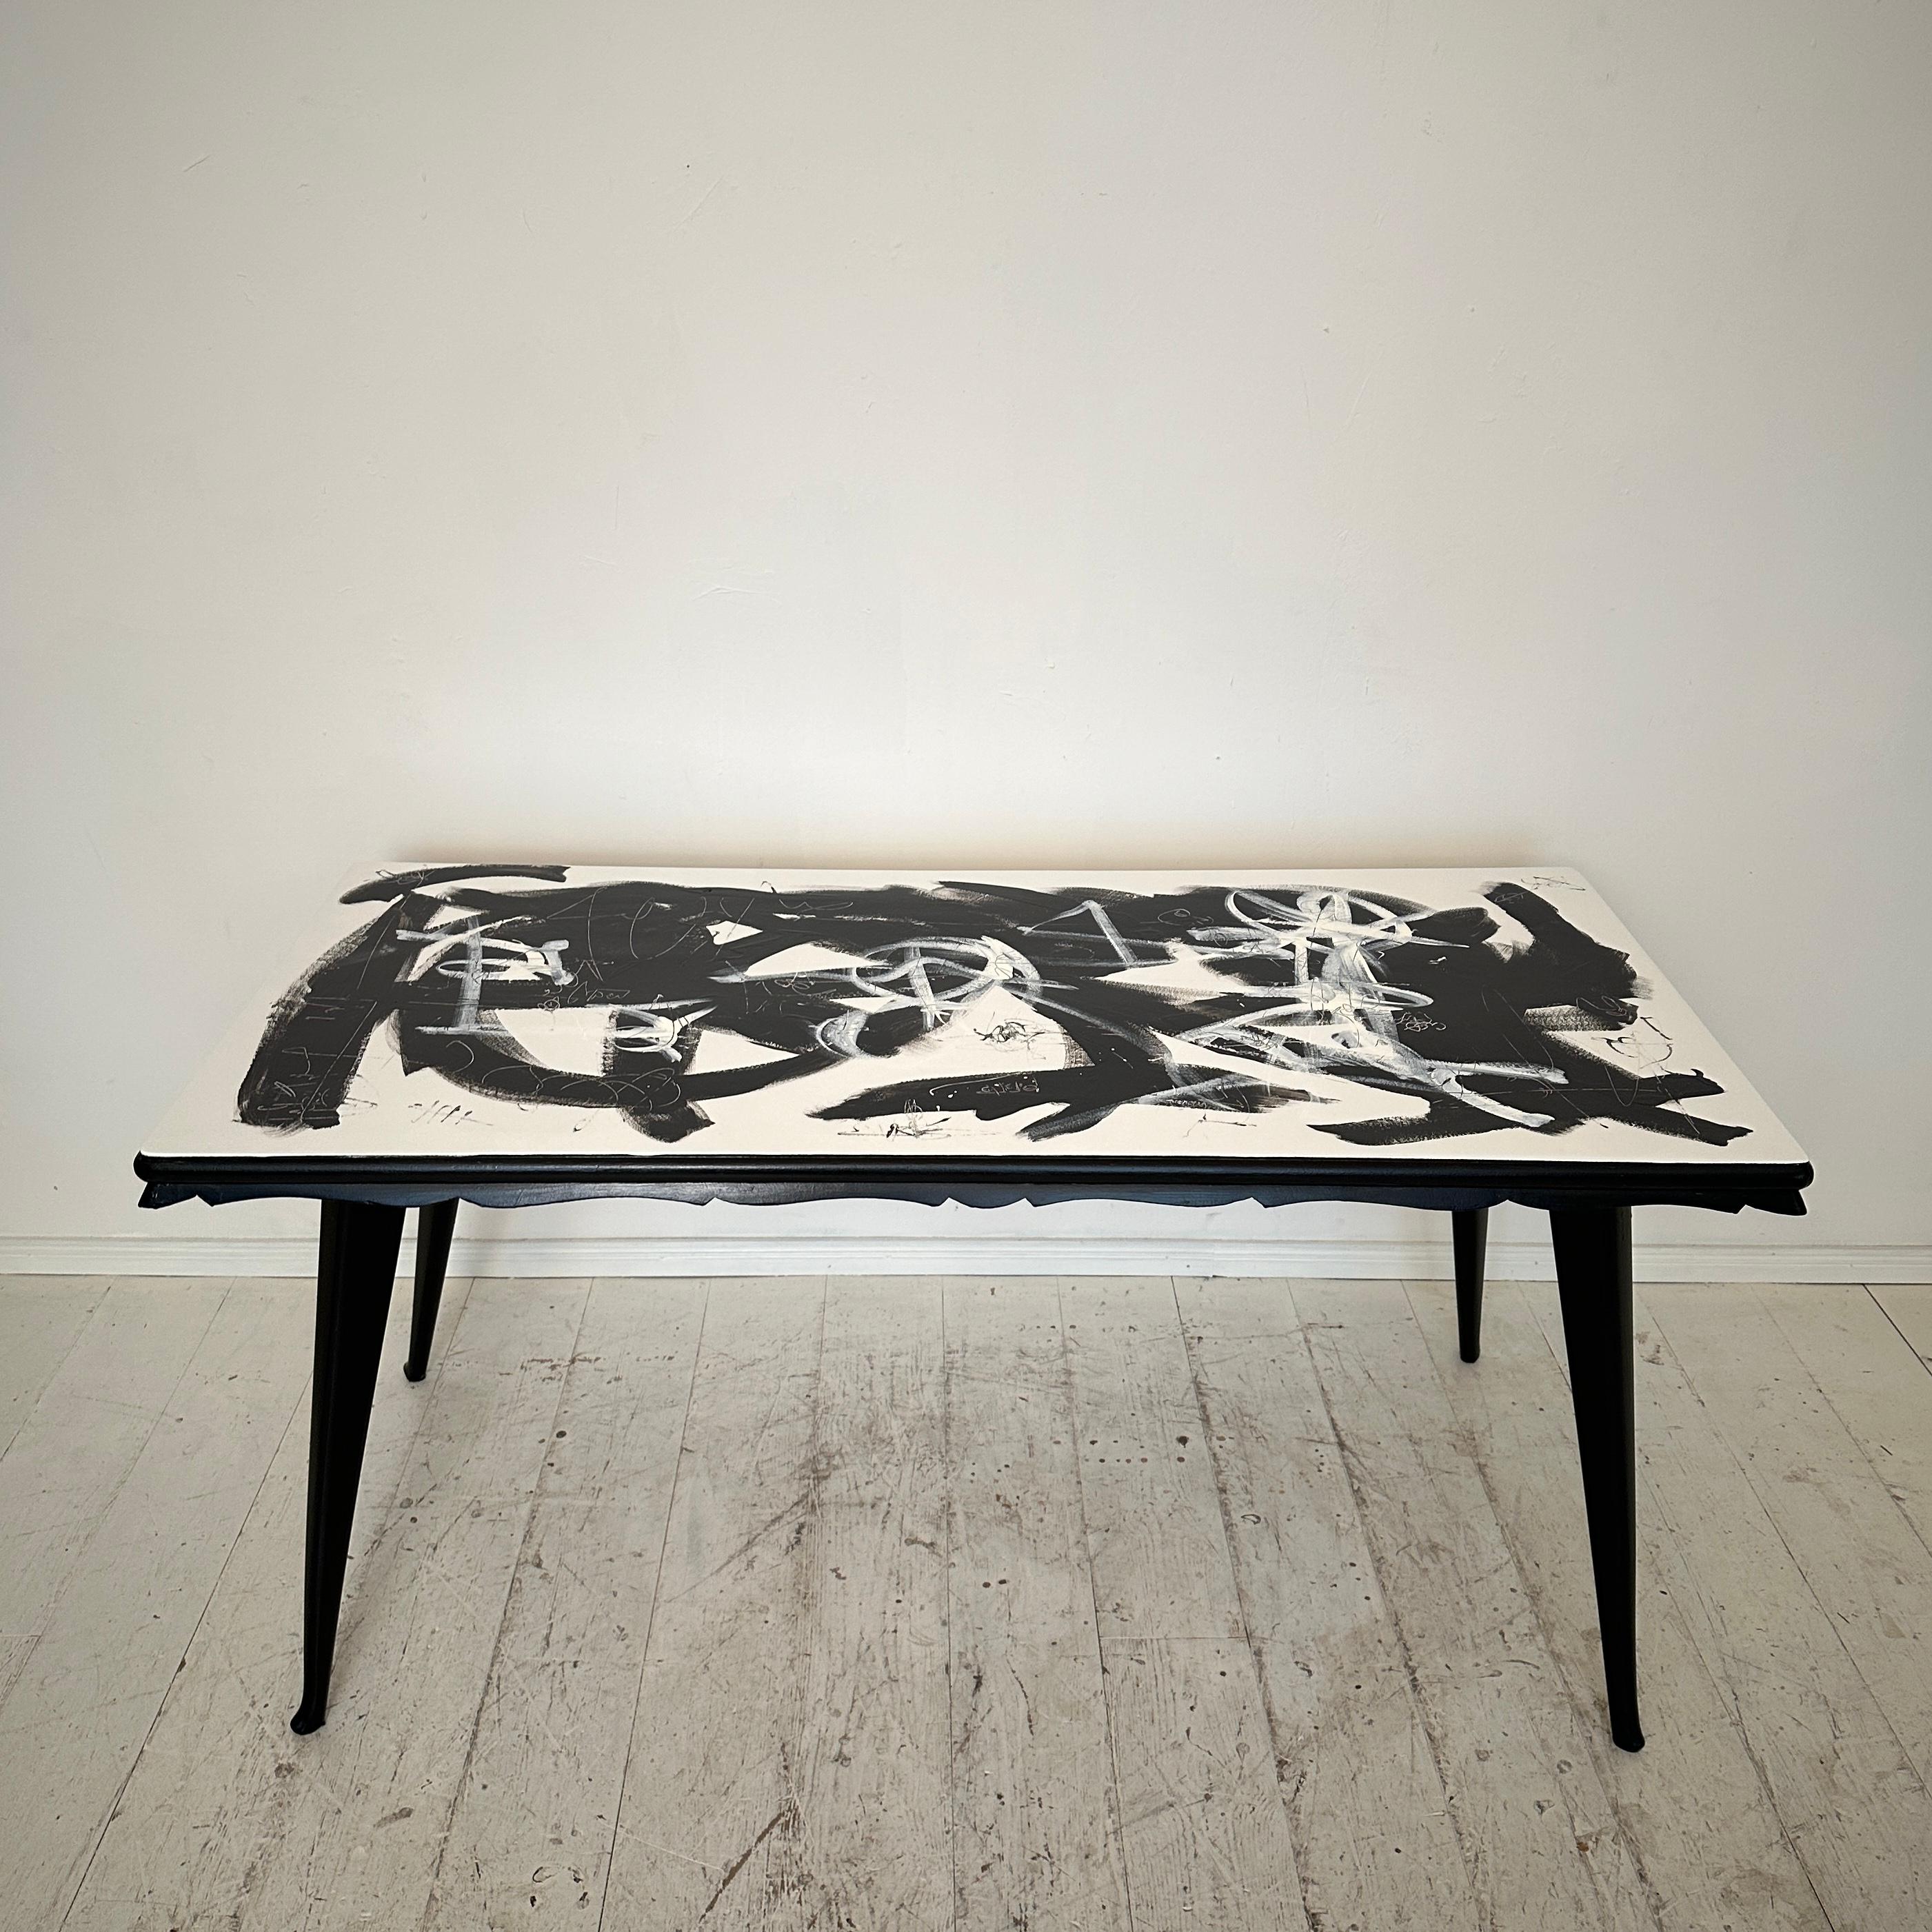 Contemporary Abstract Painted Dining Table in Black and White, 1950s Base For Sale 2